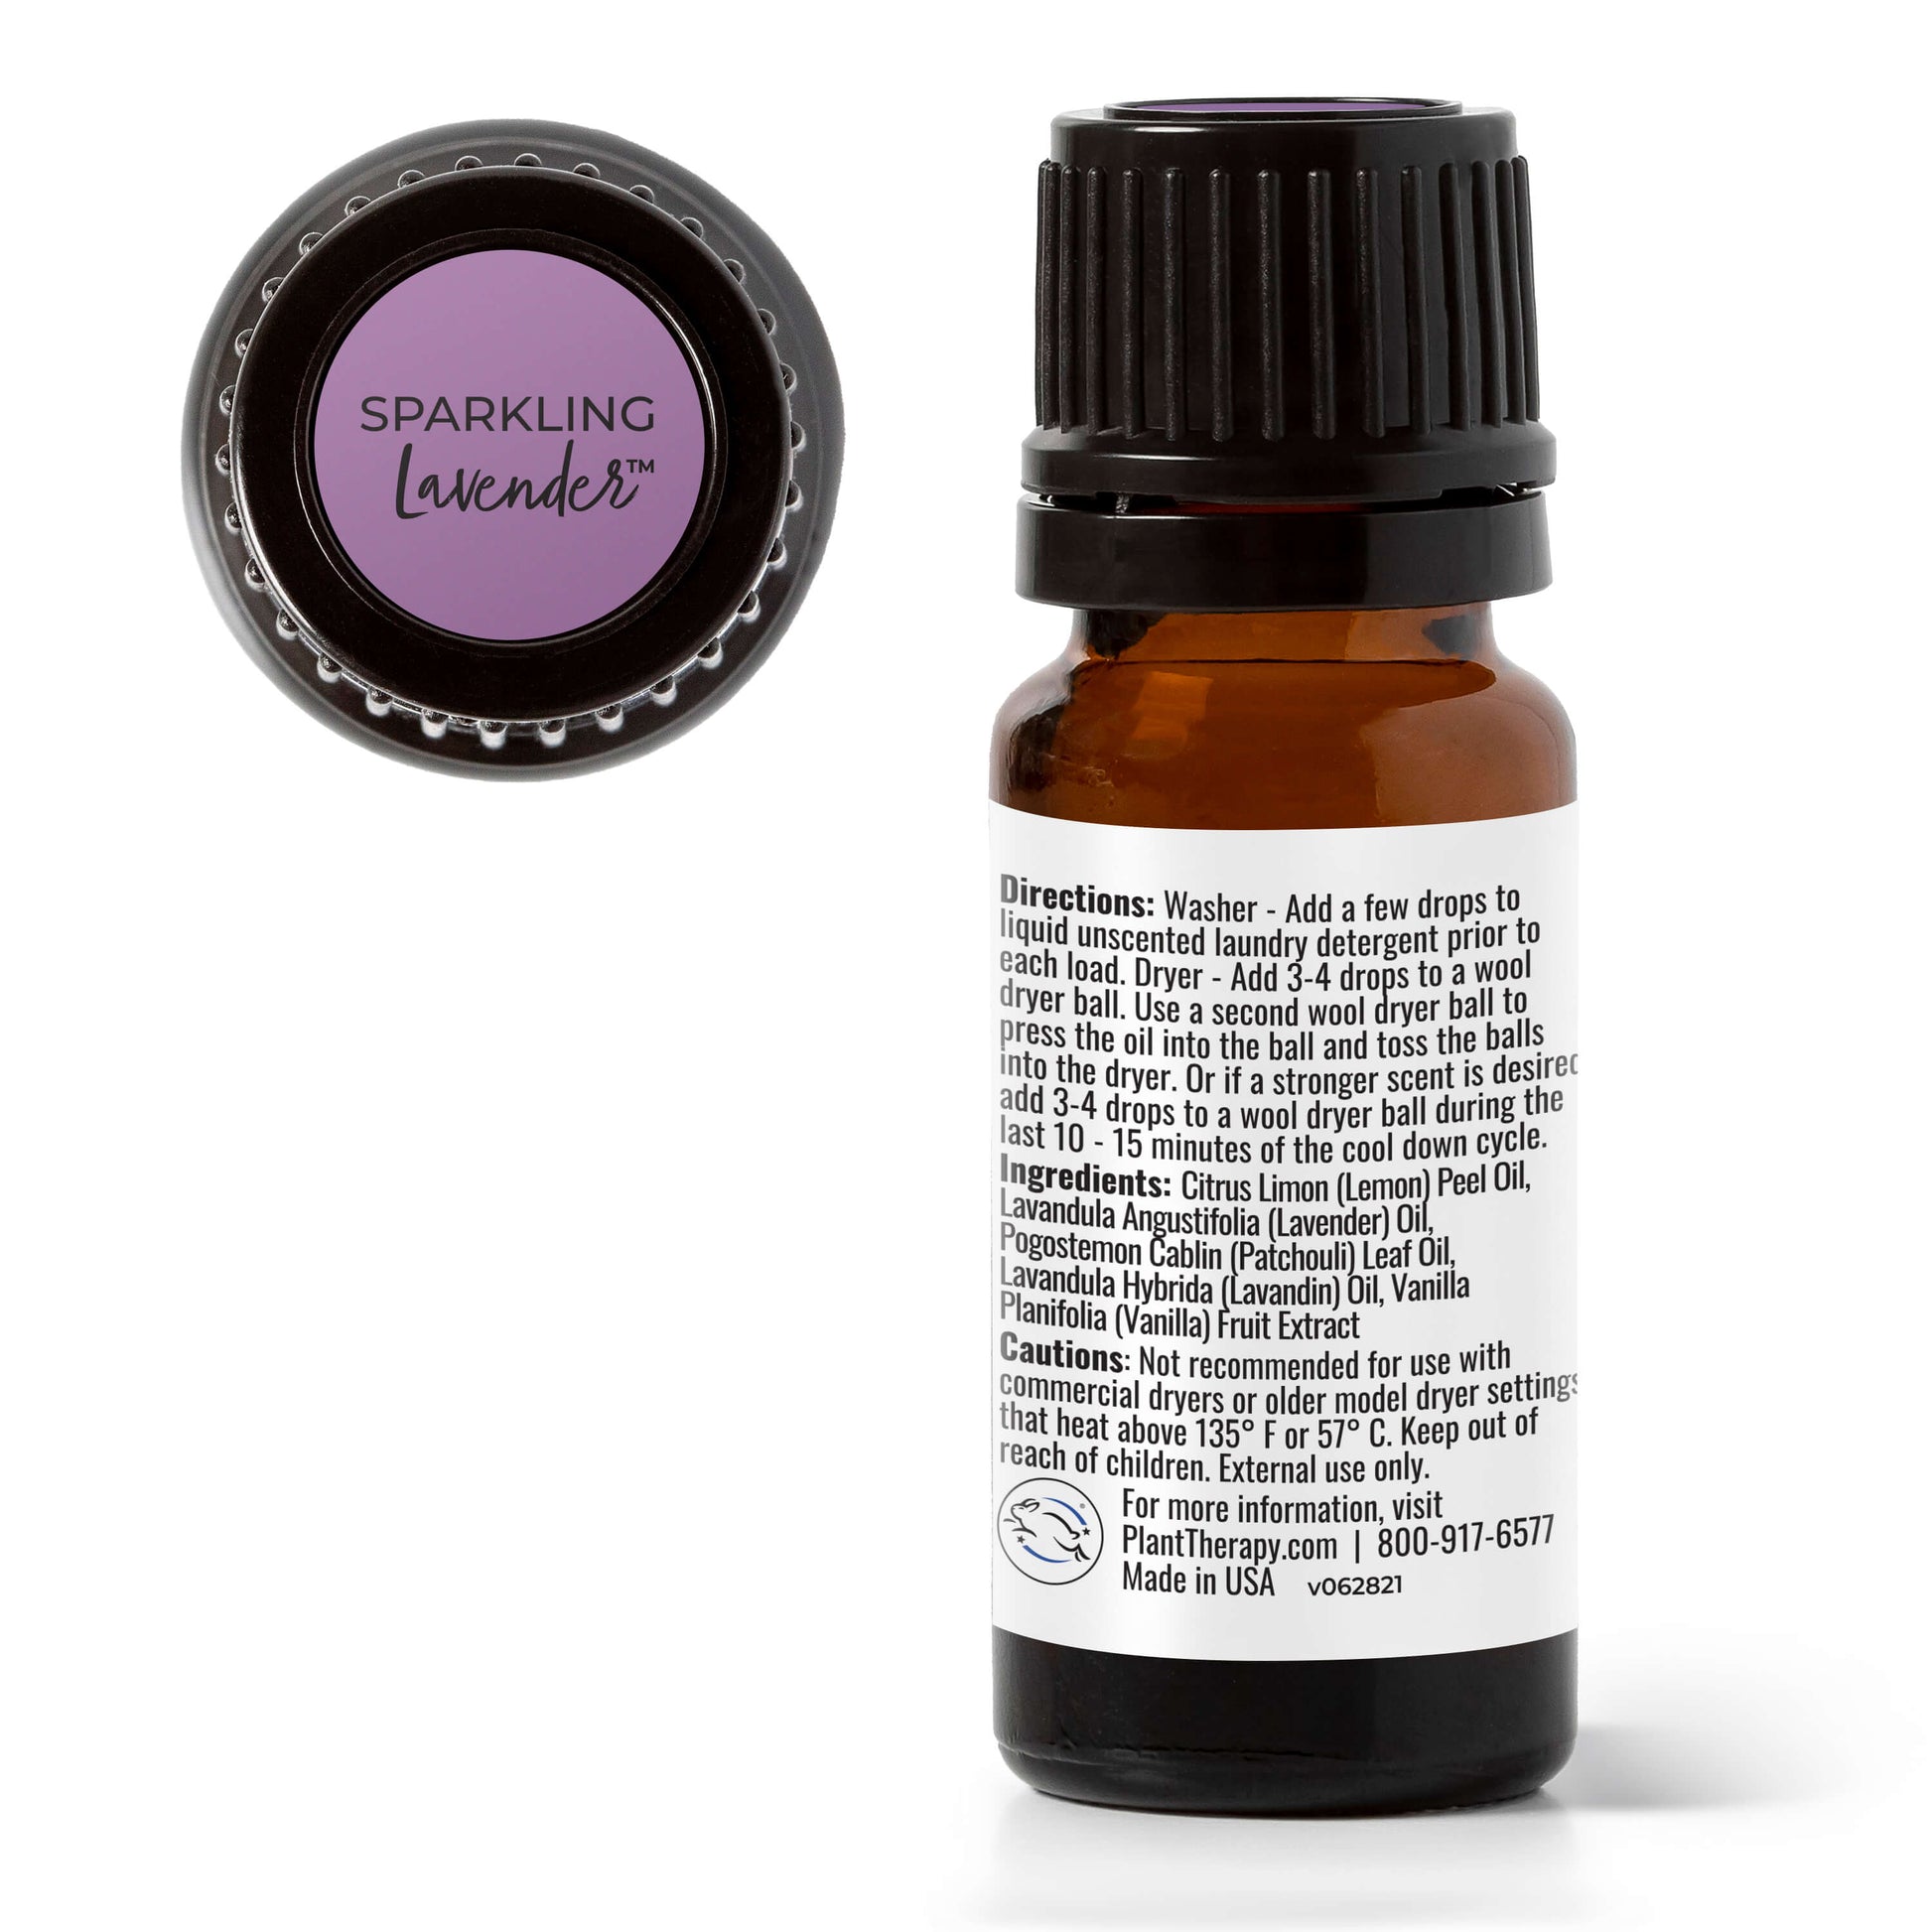 Plant Therapy Sparkling Lavender Laundry Essential Oil Blend 10 ml (1/3 oz) Pure, Undiluted, Wash Fragrance and Scent Enhancer